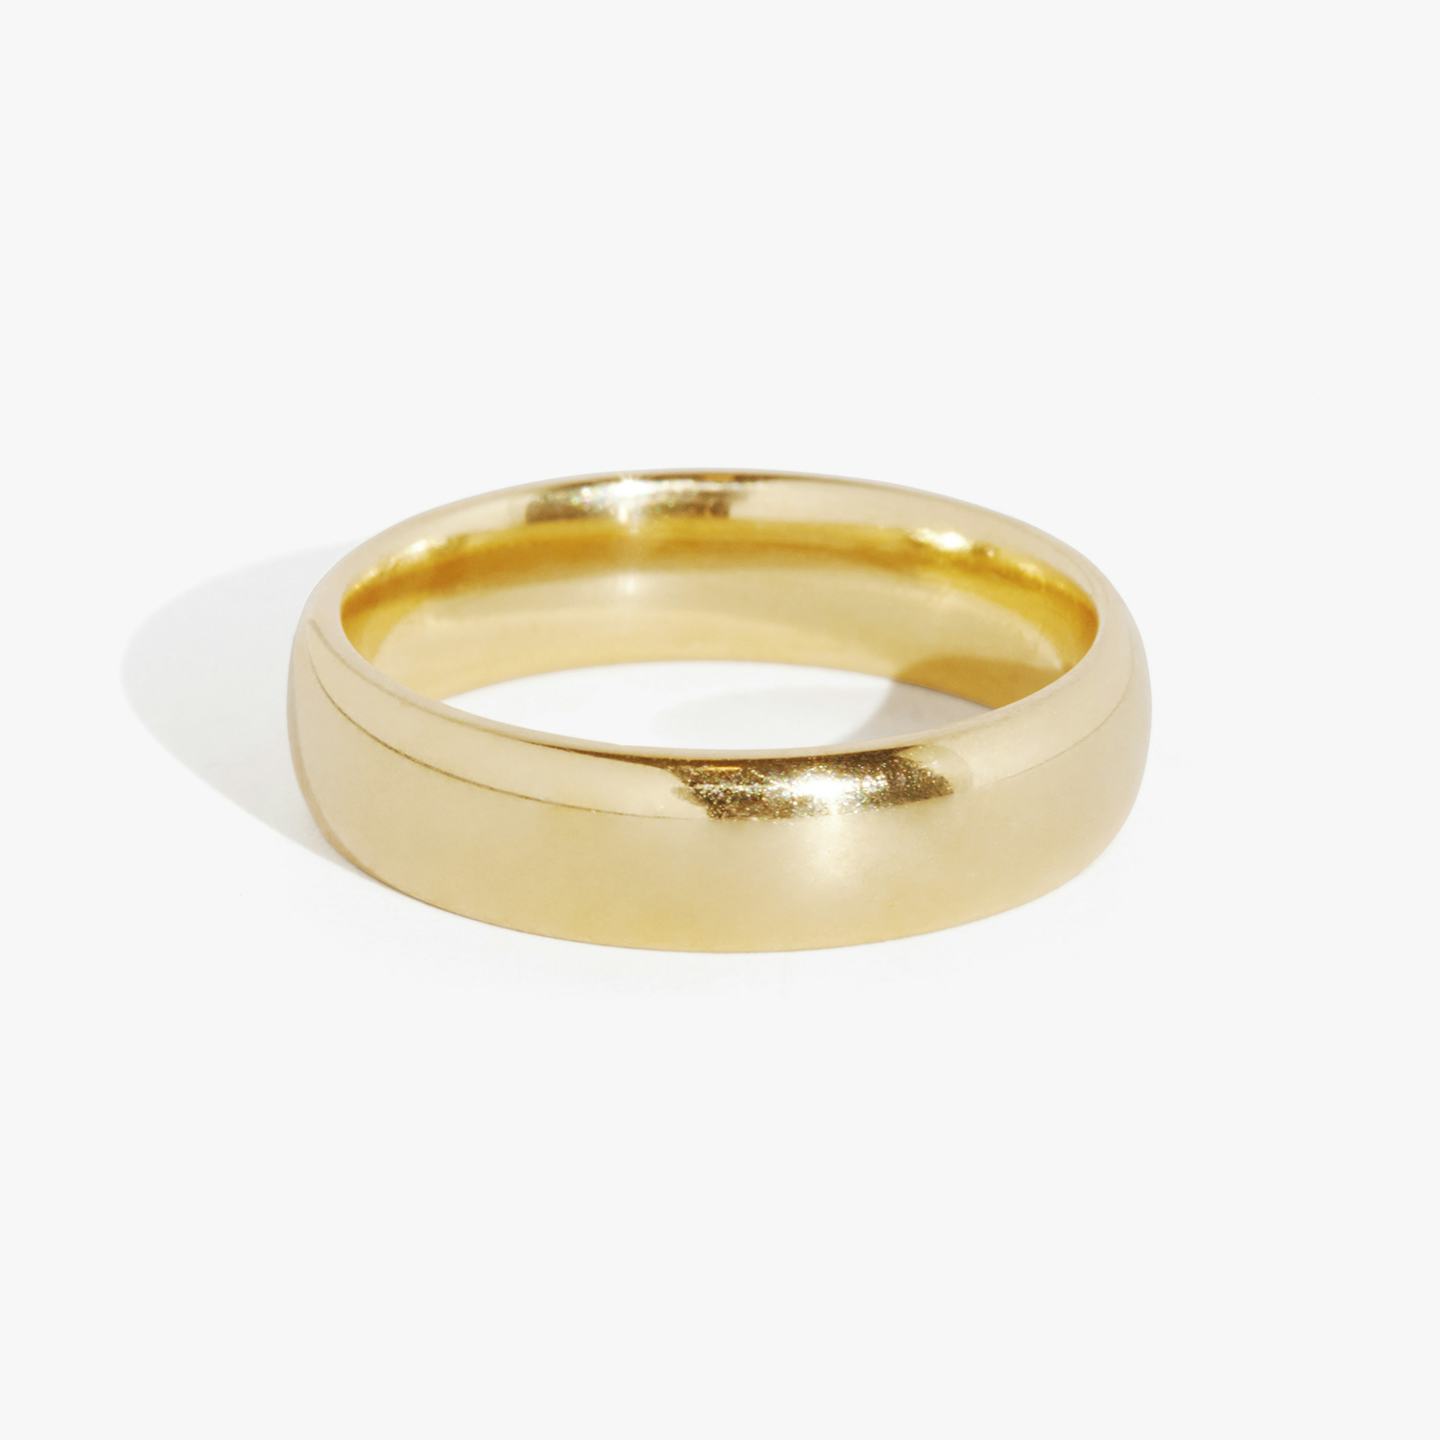 The Round | 18k | 18k Yellow Gold | Band width: Large - 4.5mm